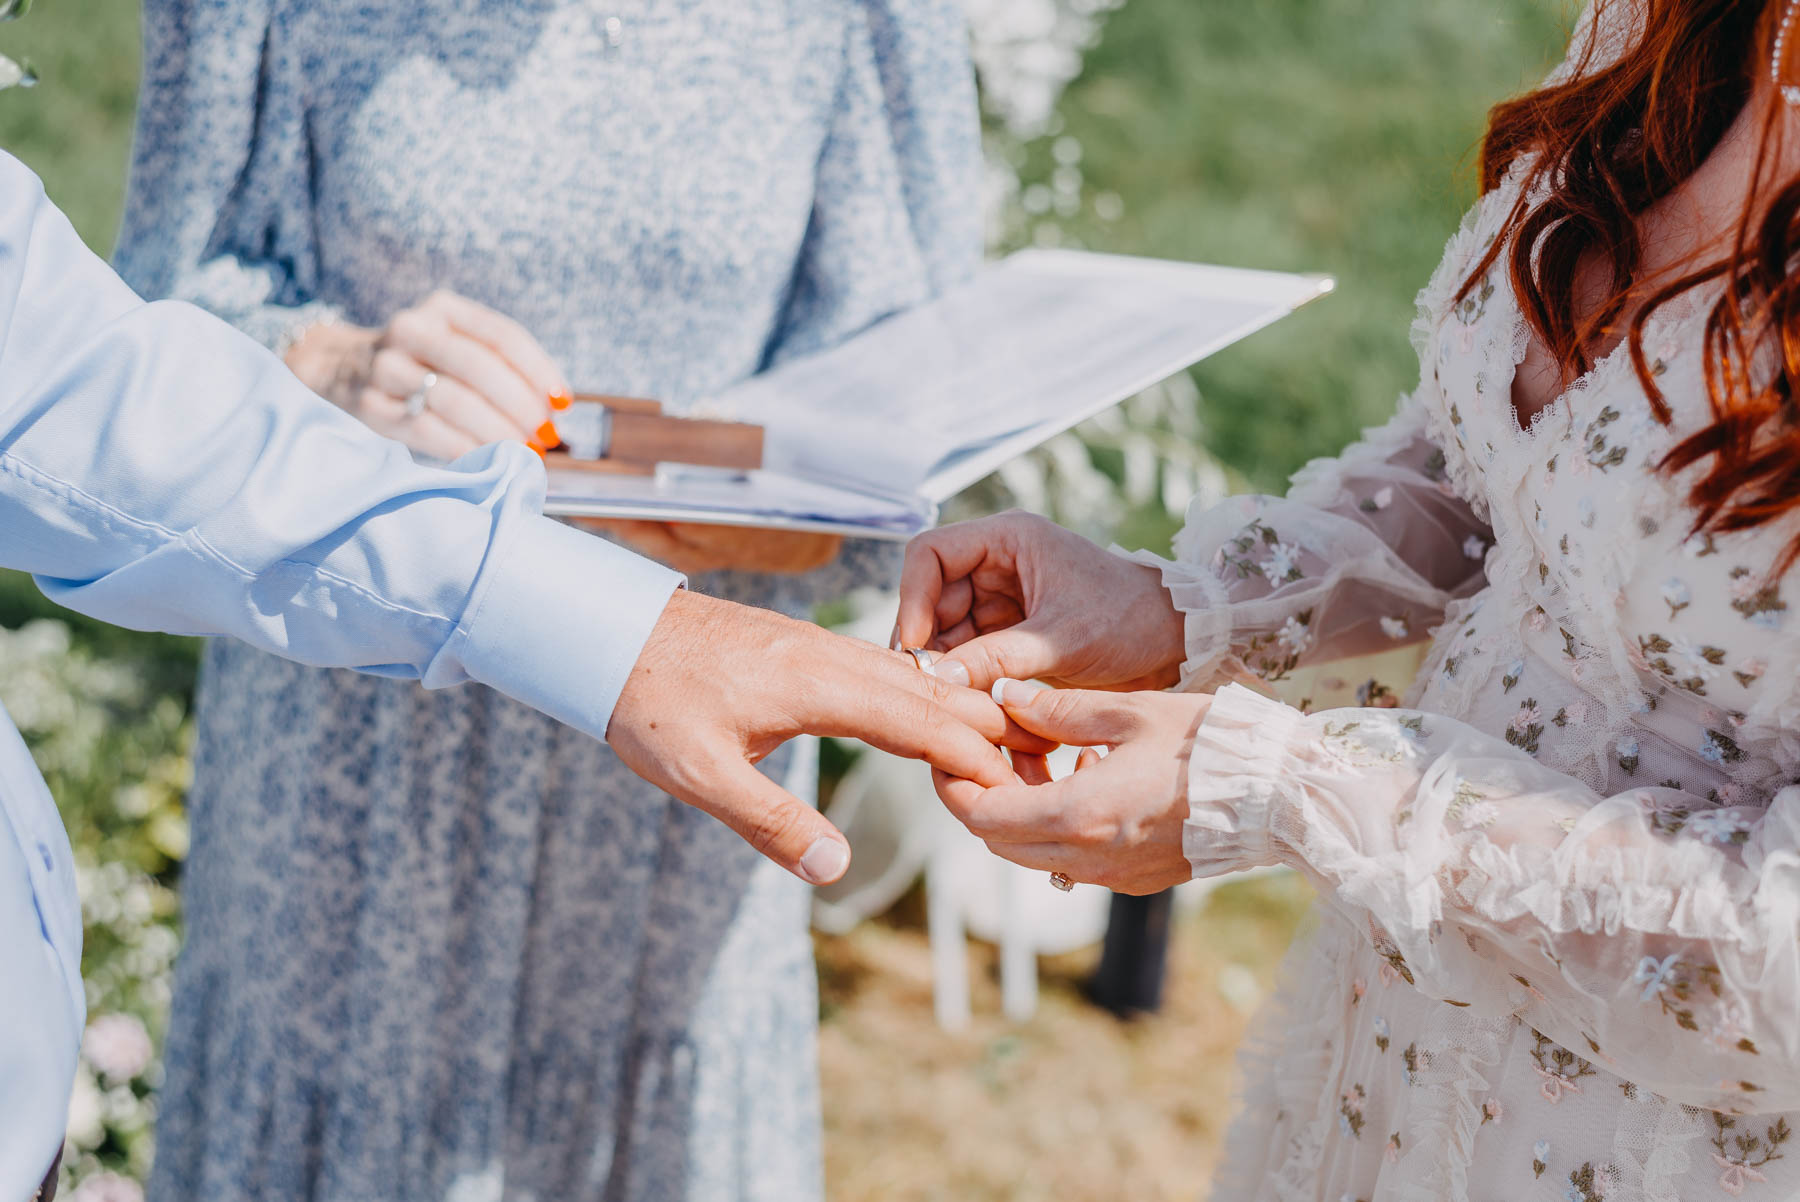 The bride puts a wedding ring on the groom's finger during the handfasting ceremony